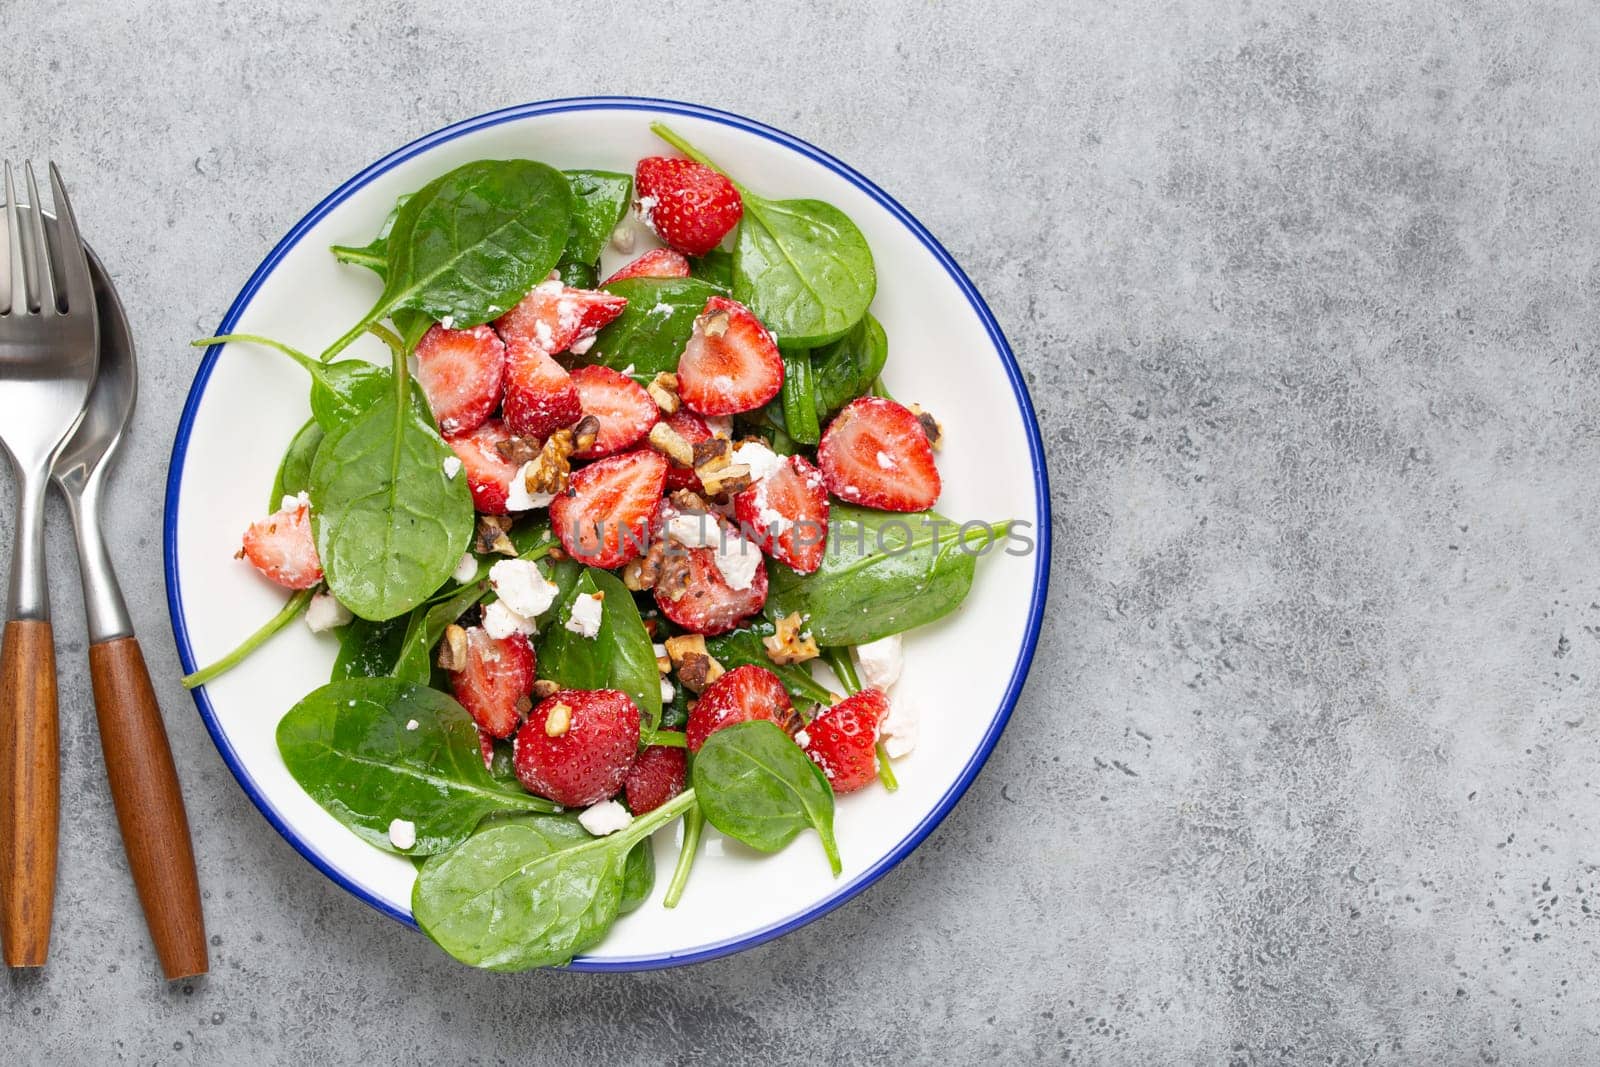 Light Healthy Summer Salad with fresh Strawberries, Spinach, Cream Cheese and Walnuts on White Ceramic Plate, Grey rustic stone Background From Above. by its_al_dente